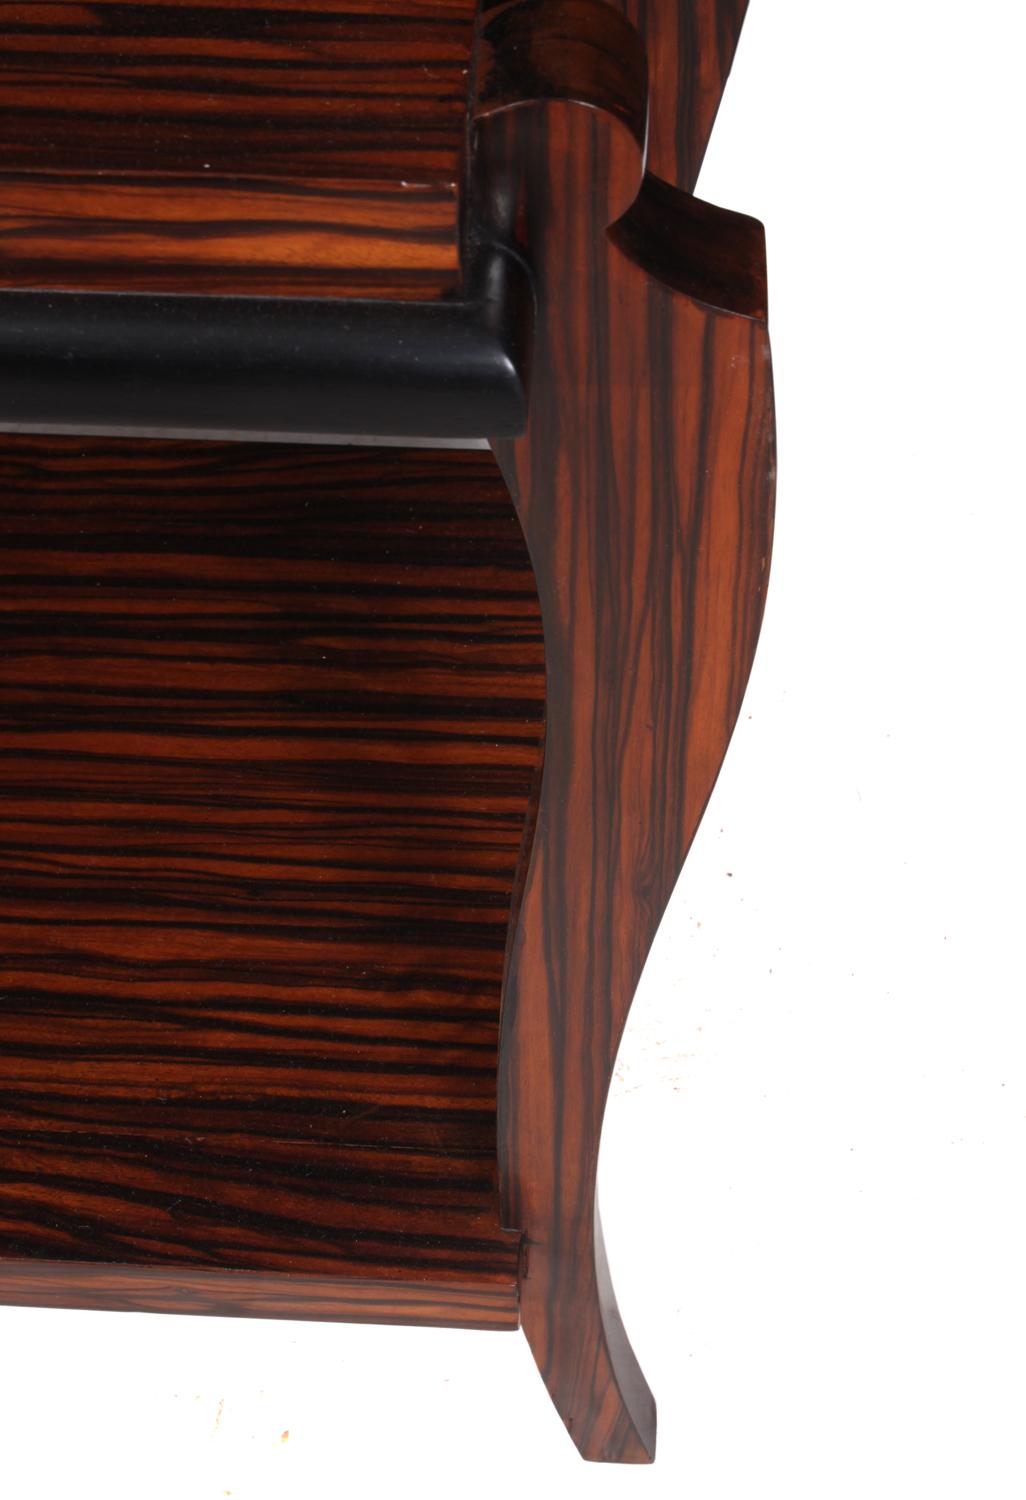 Art Deco Macassar ebony occasional table.
An unusual table in Macassar ebony this table has been fully polished and in very good condition through out.

Age: 1930

Style: Art Deco

Material: Macassar Ebony

Origin: Italy

Condition: Very